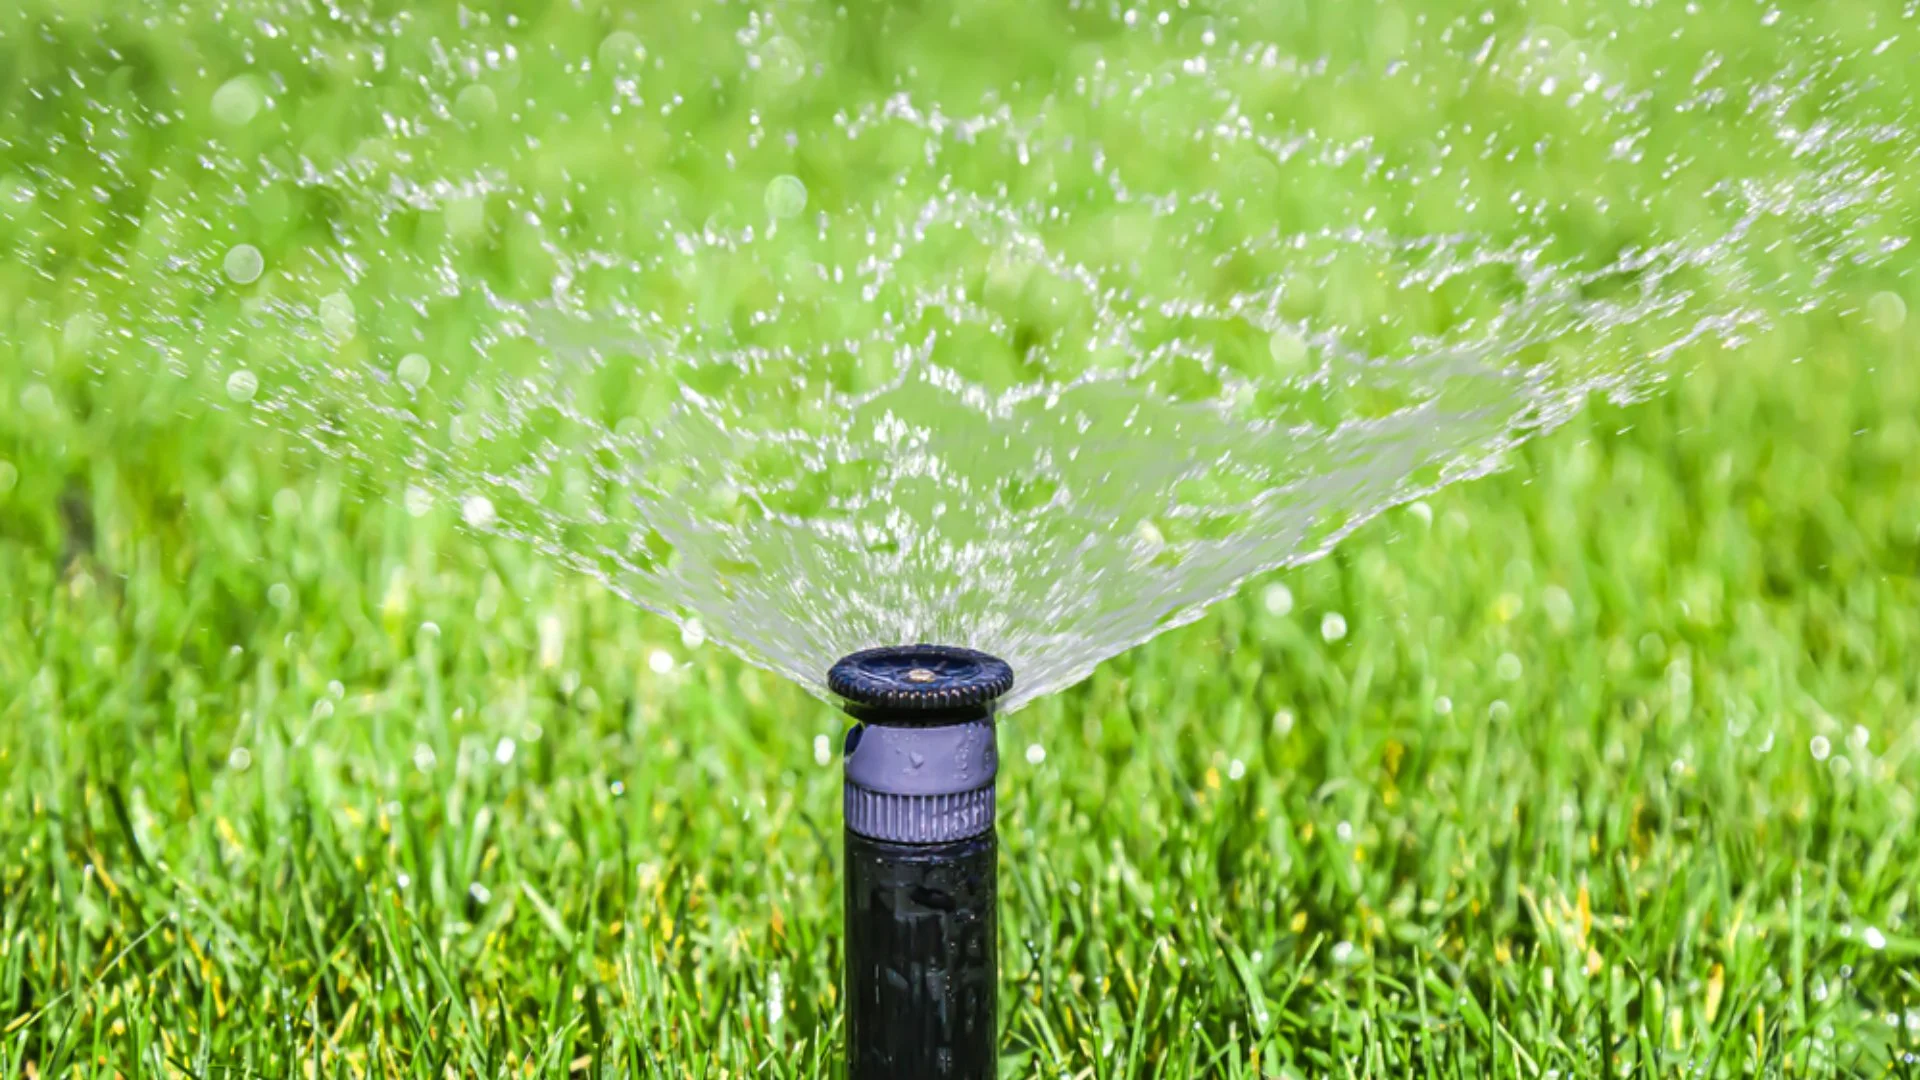 5 Things That Could Be Causing Low Water Pressure in Your Irrigation System